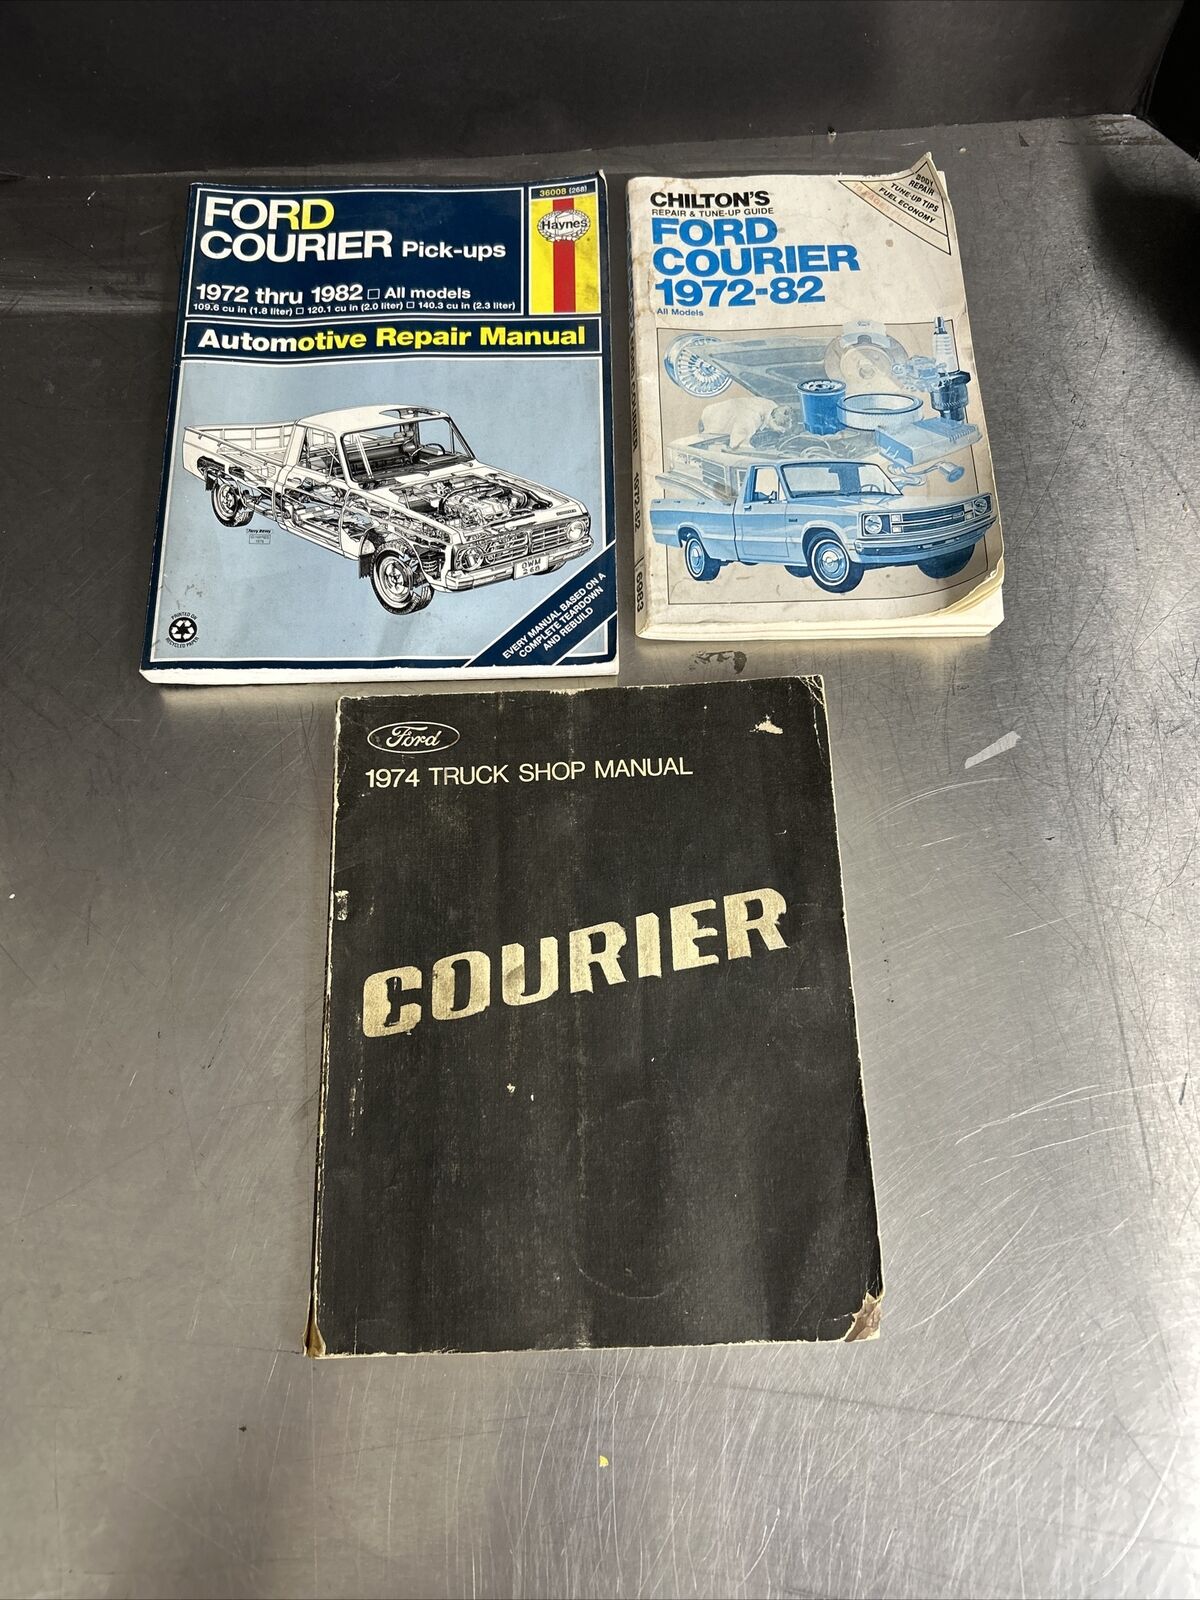 Lot Of 3 Ford Courier Repair Manuals 